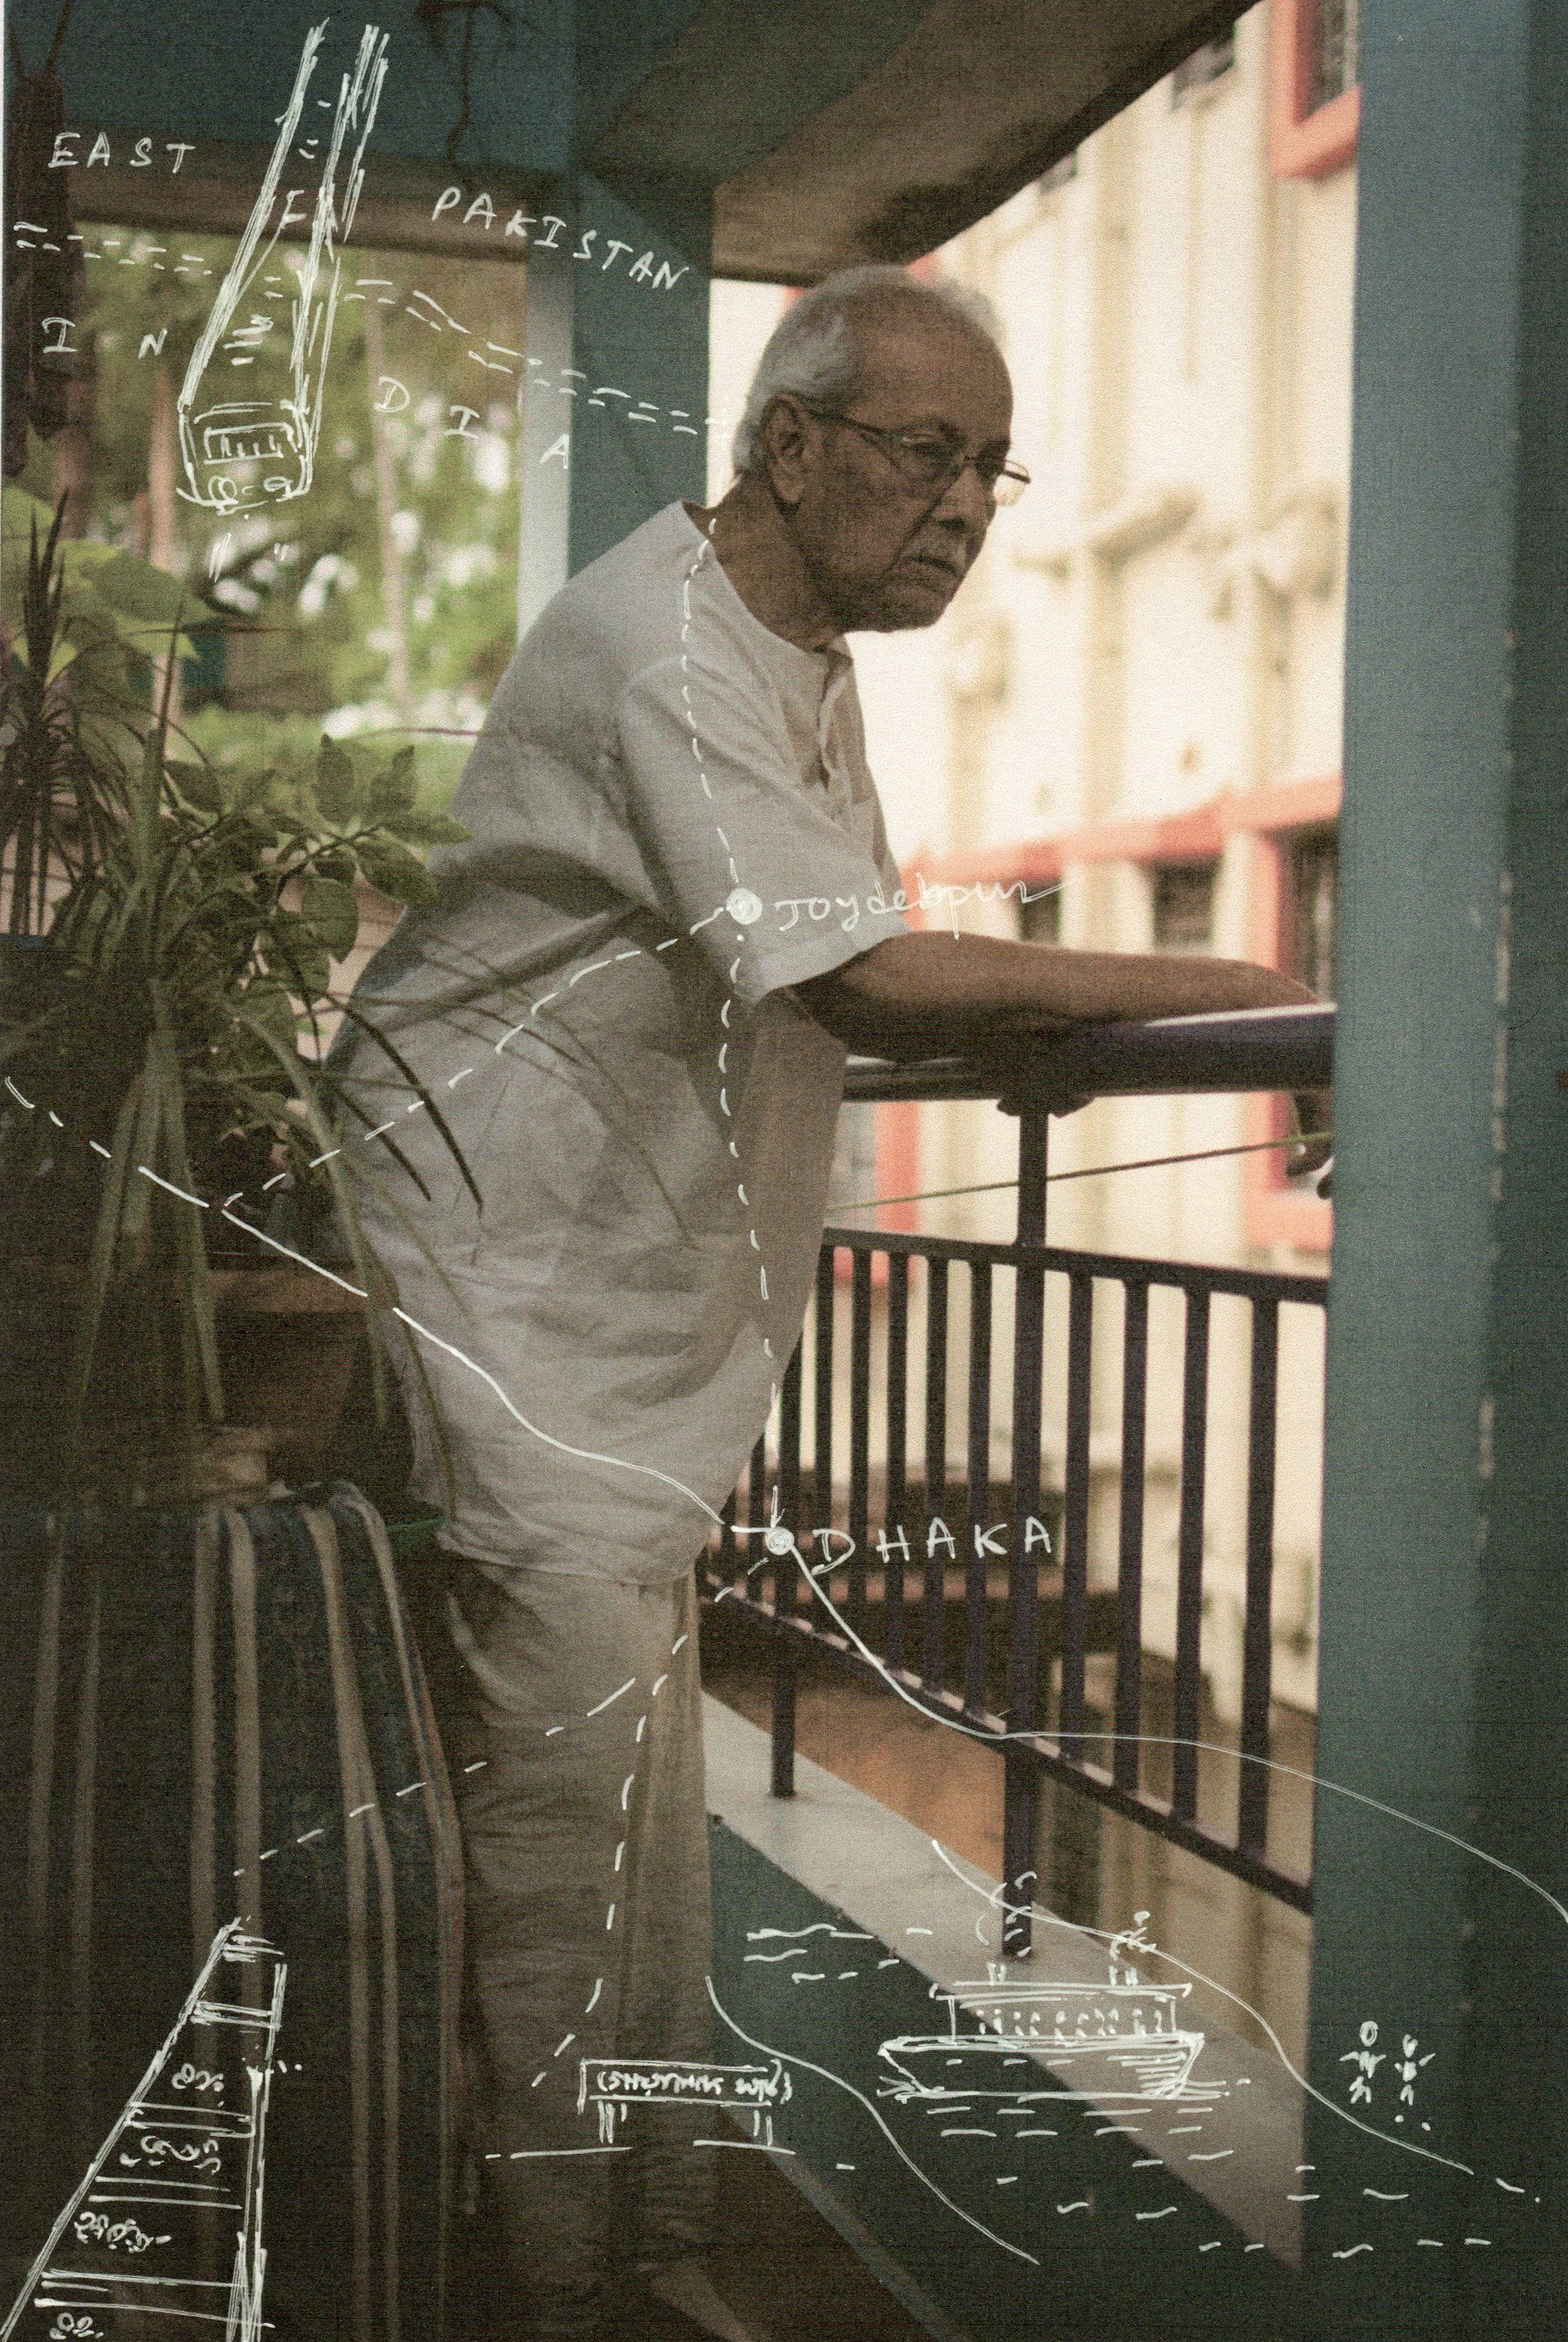  Mr Bhawani Prasad Mukhote had just stepped into his teens. During the 1950 Dhaka riots, his parents had forced him to leave home for Calcutta. He had to take a 7 hour long ferry that would connect Dhaka to the nearest port ‘Goalondo Ghat’ from where